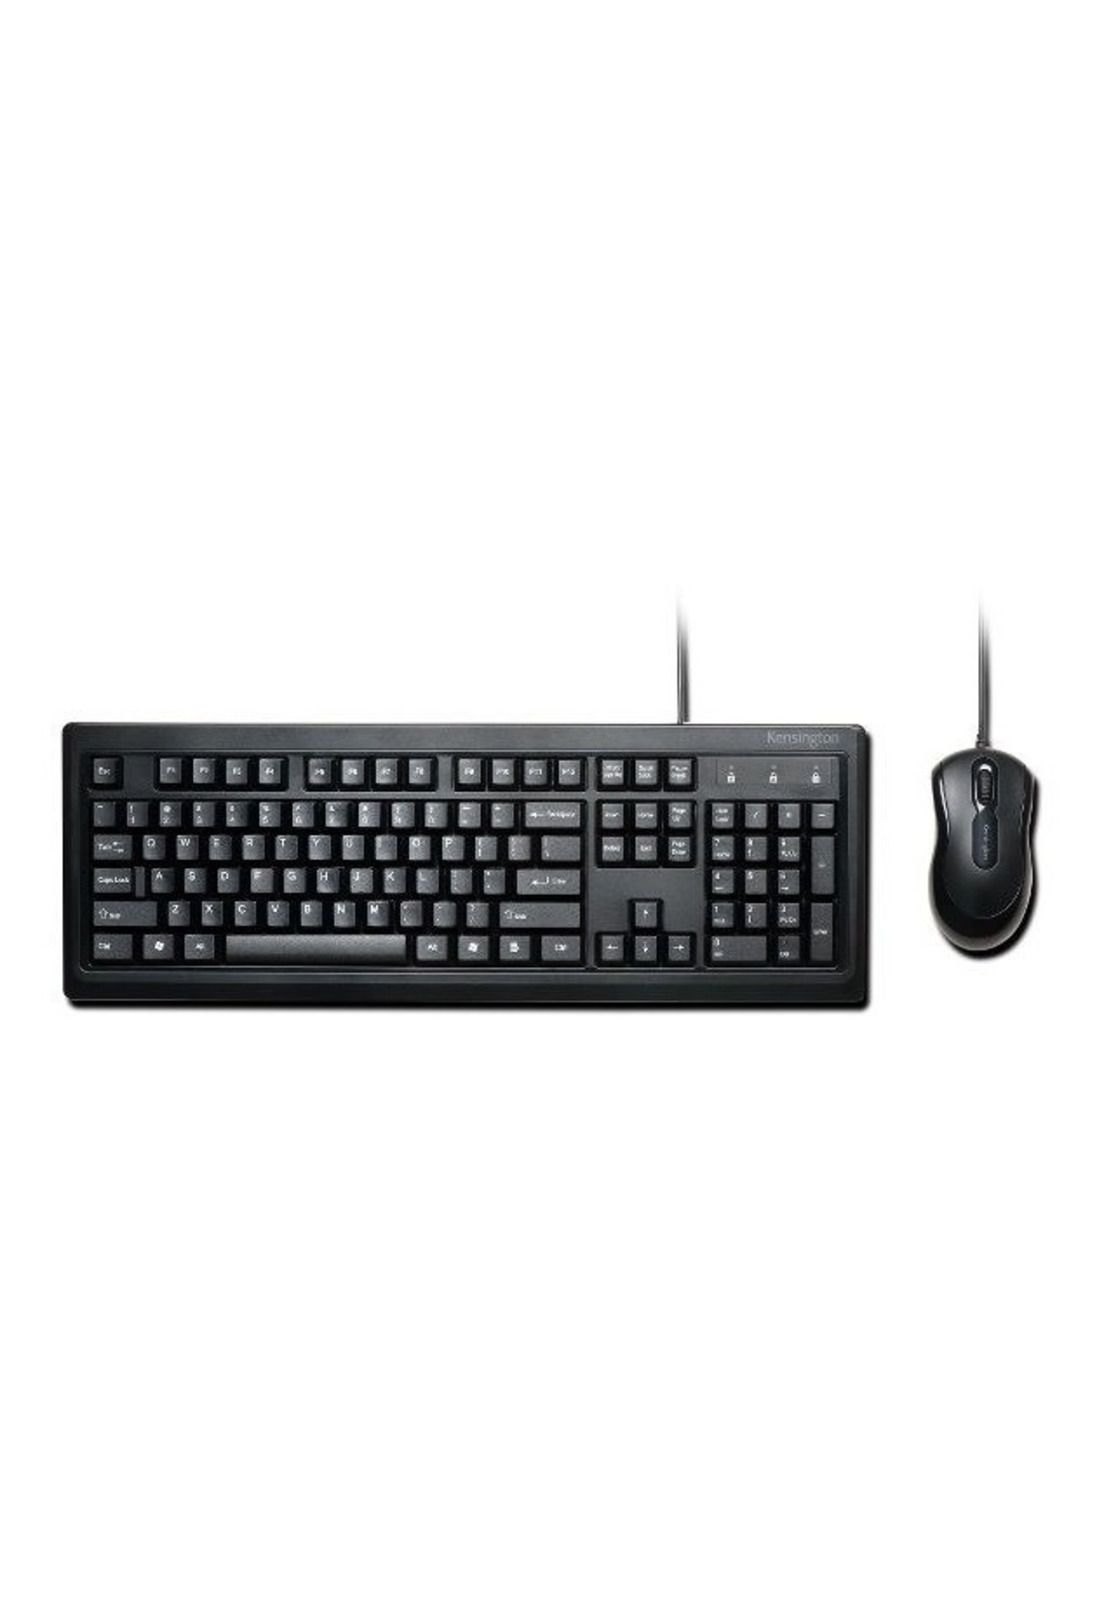 Kit Combo Teclado Mouse Wired Usb Kensington For Life